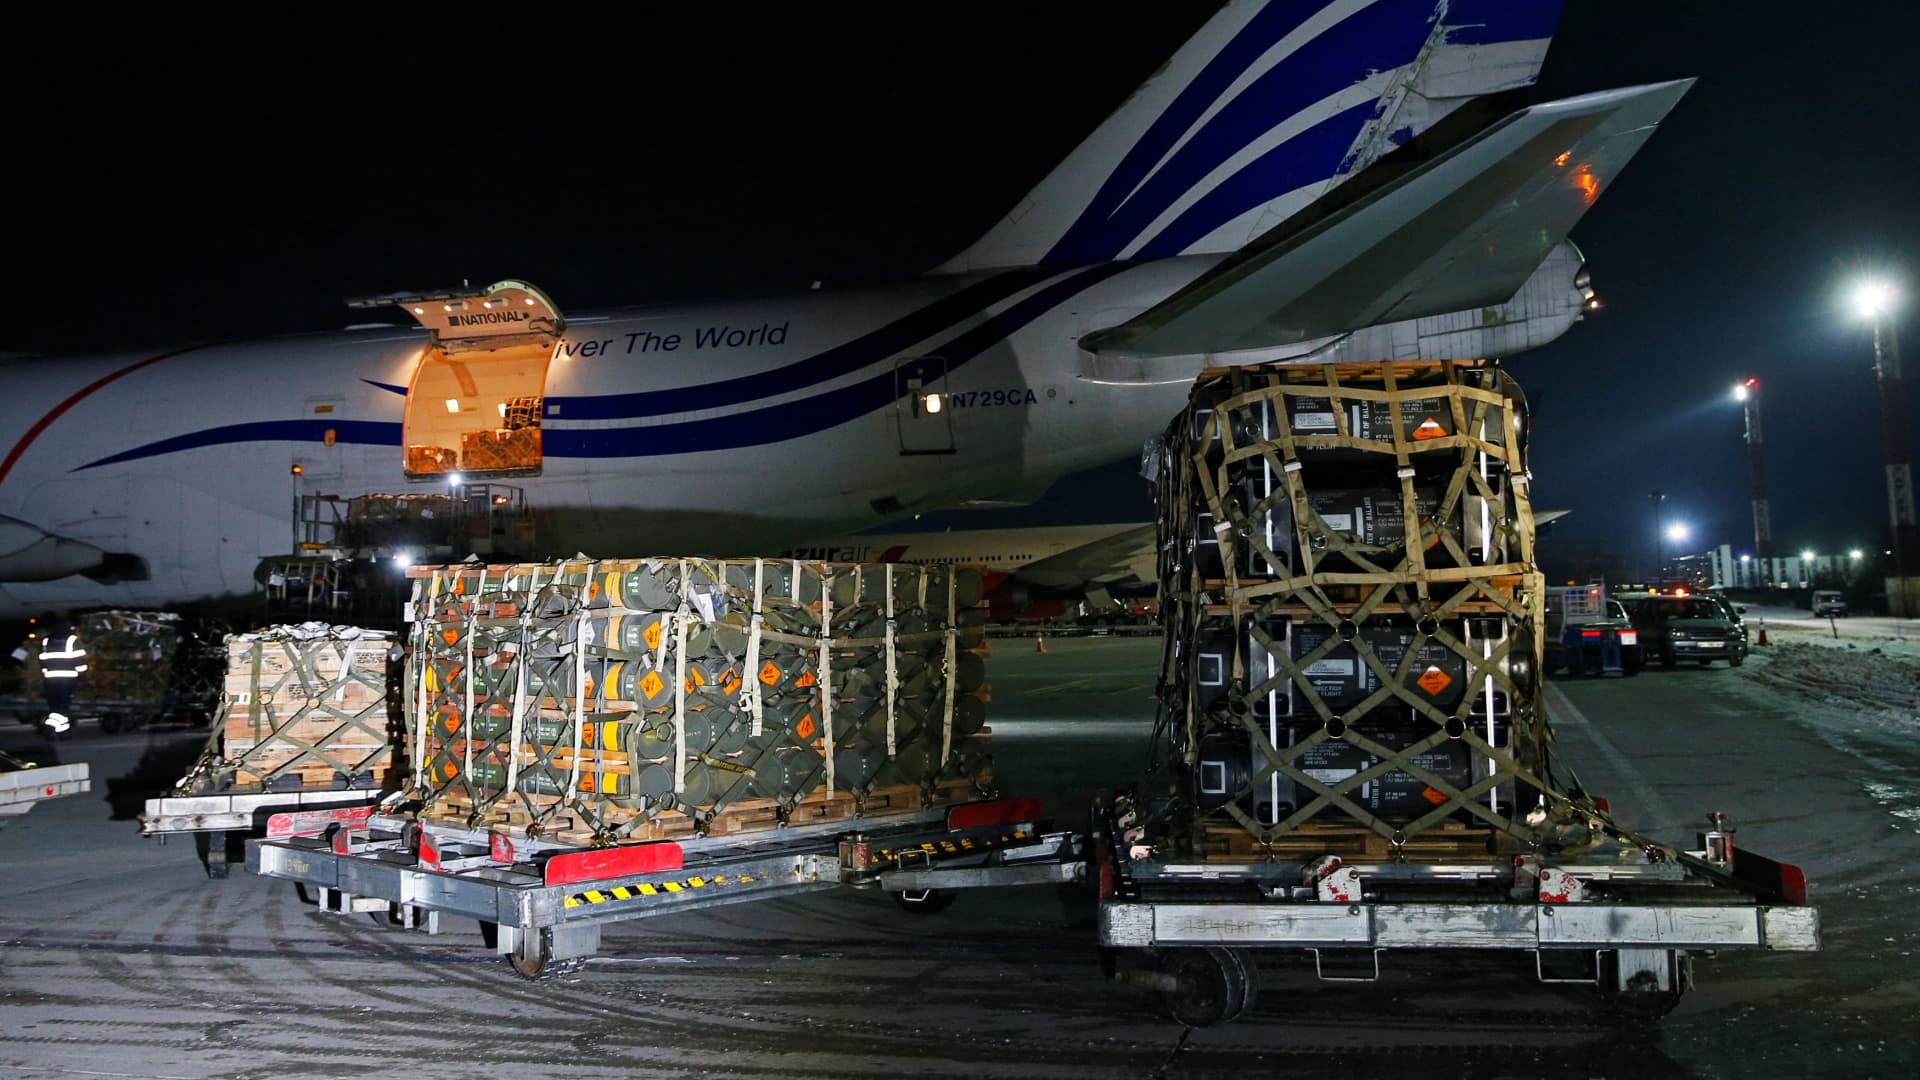 Workers unload a shipment of military aid delivered as part of the United States of America's security assistance to Ukraine, at the Boryspil International Airport outside Kyiv, Ukraine January 25, 2022.